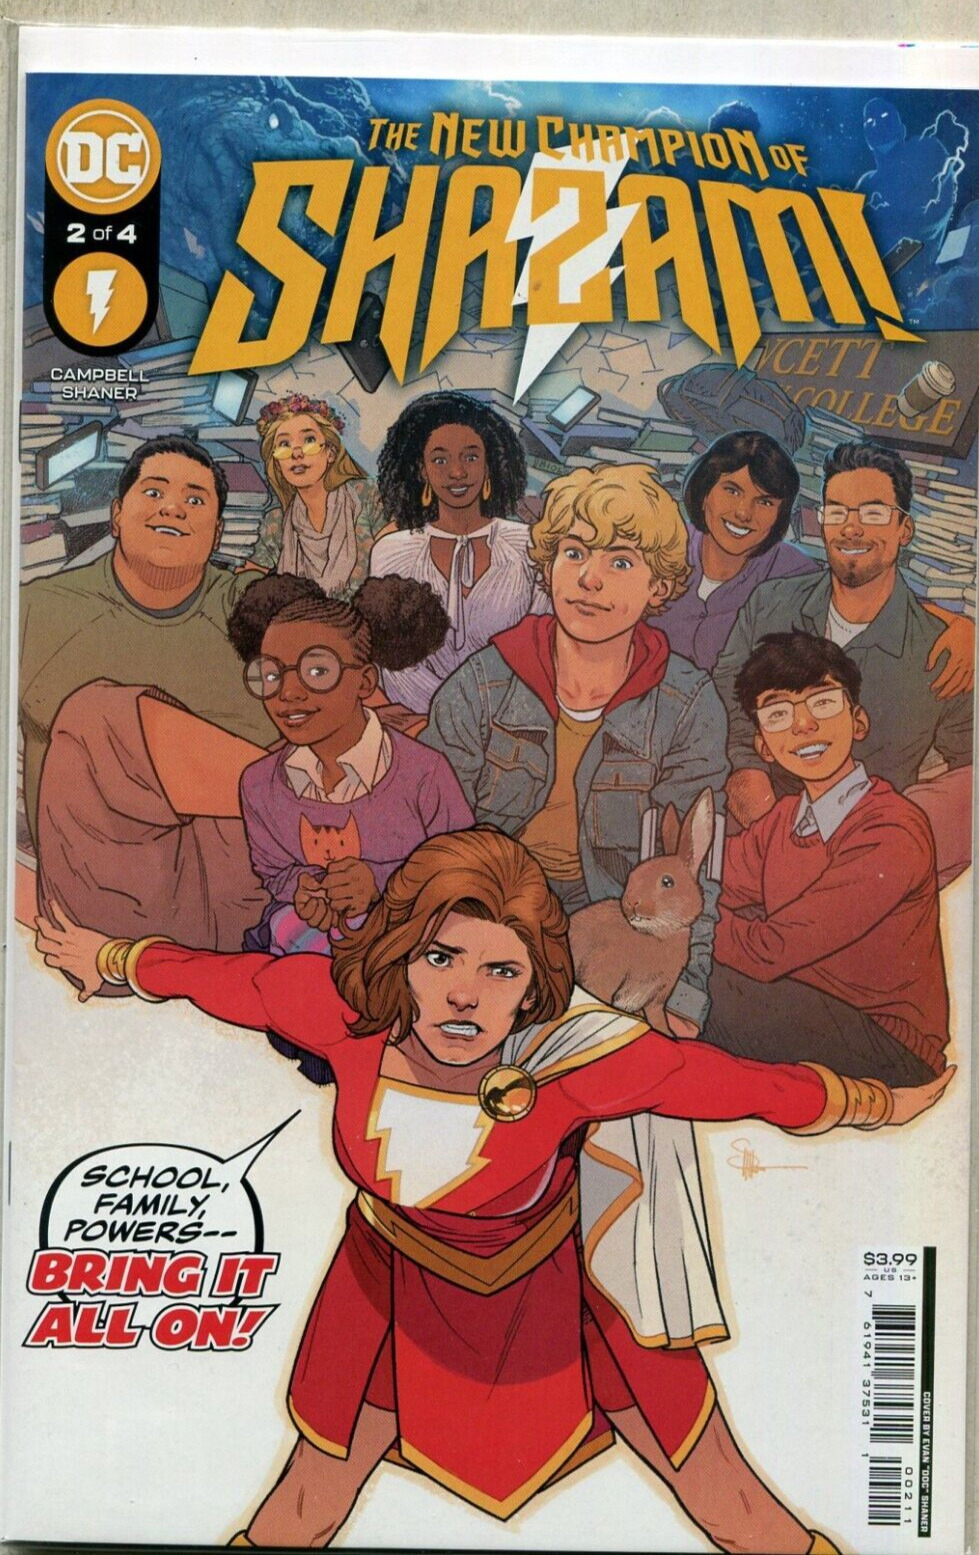 The New Champion -Shazam : Bring It All On #2 of 4 NM  DC Comics CBX29